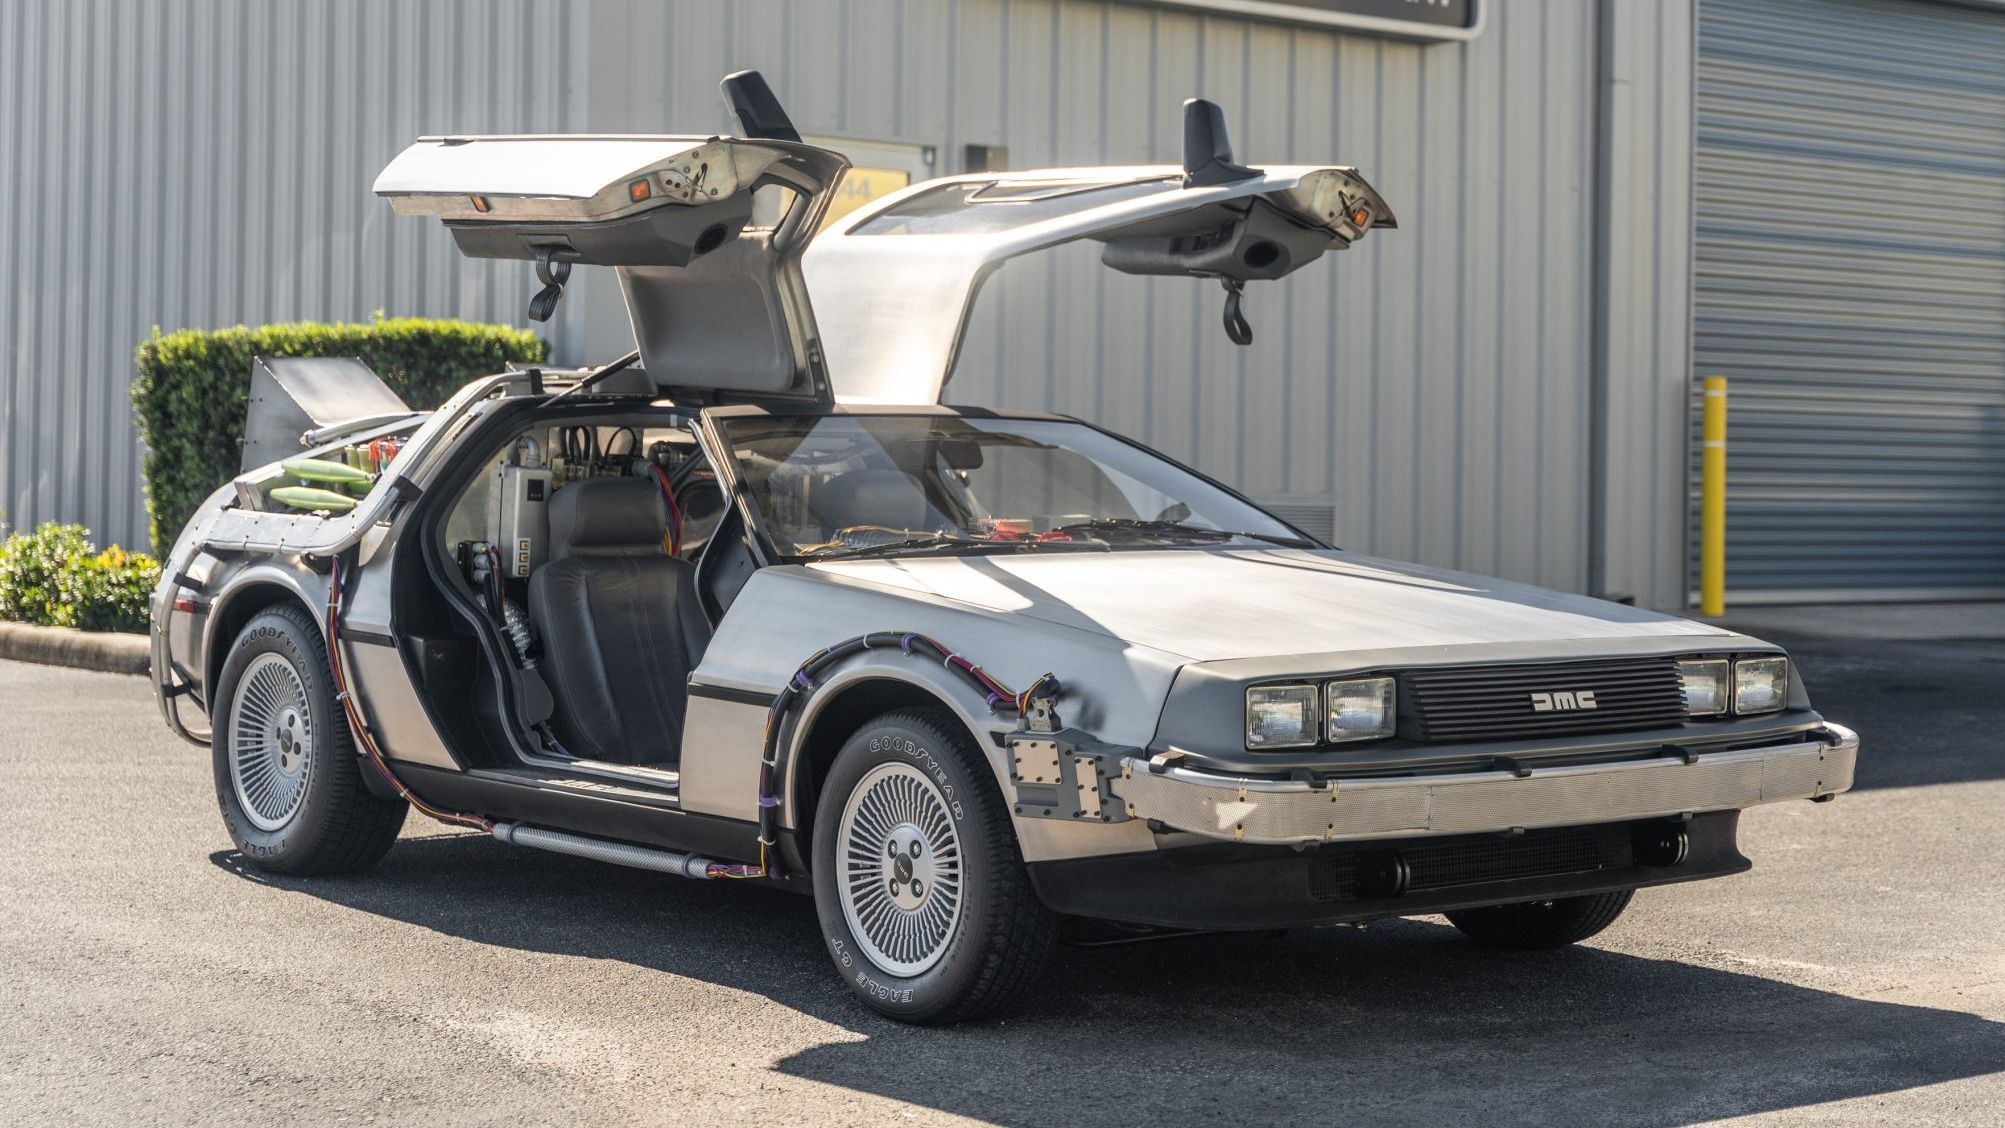 A 1981 DeLorean modified to look like a Back to the Future time machine.